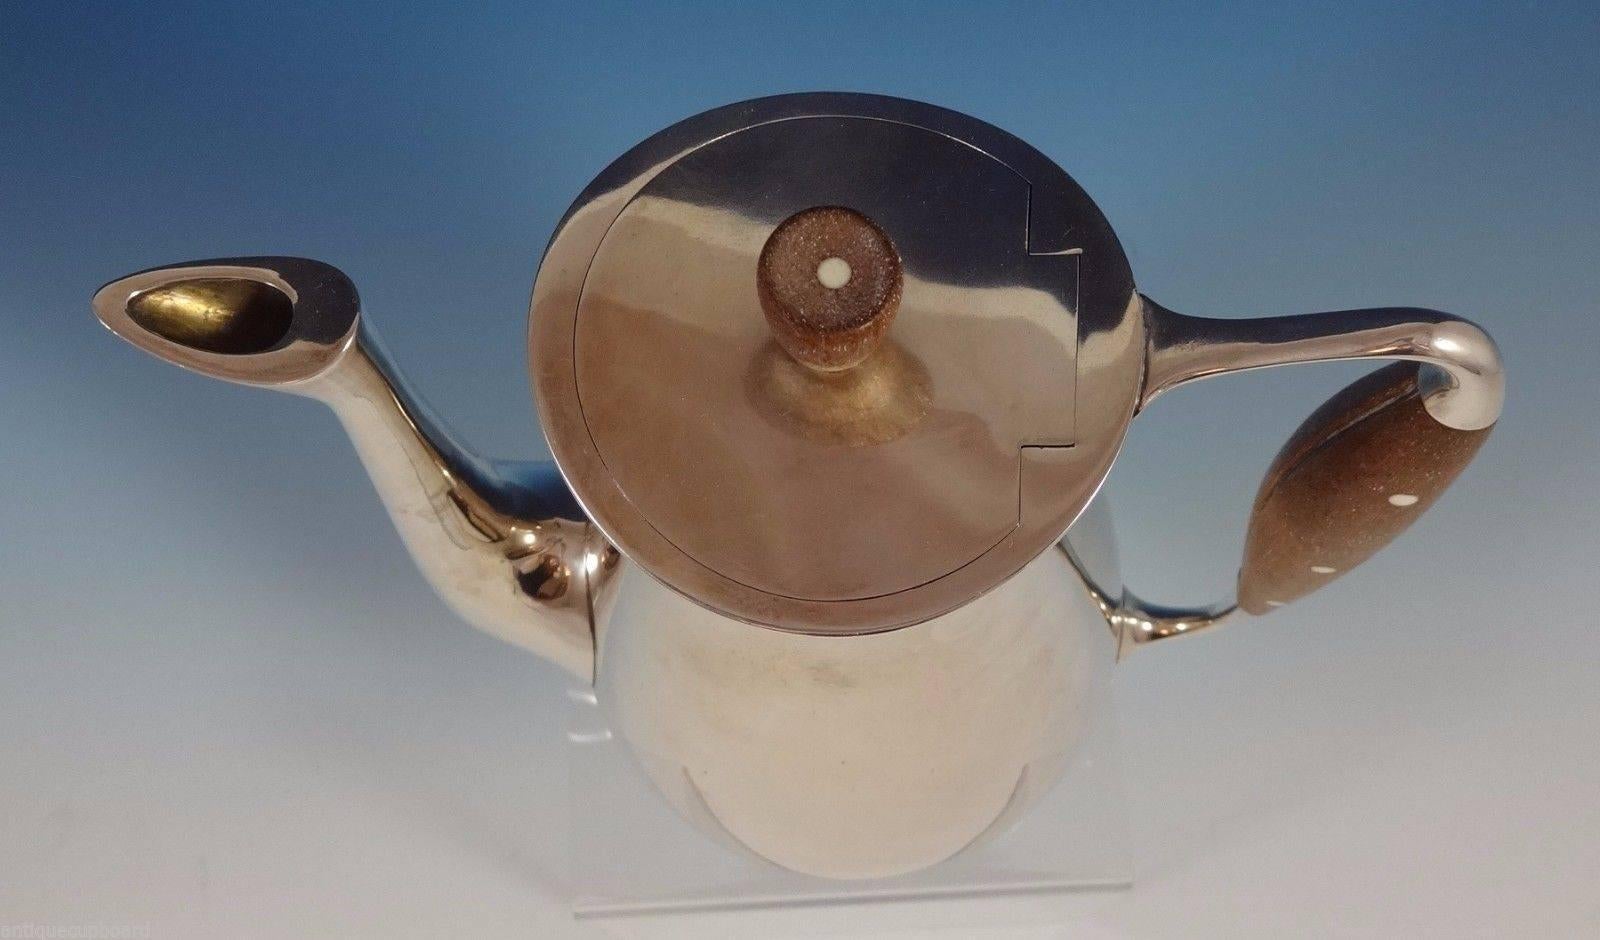 Michelsen.

Modernist Danish sterling silver coffee pot made by Michelson. It has a wood handle and finial inlaid with dots. The piece dates from the 1940-1950s. It measures 8 1/4